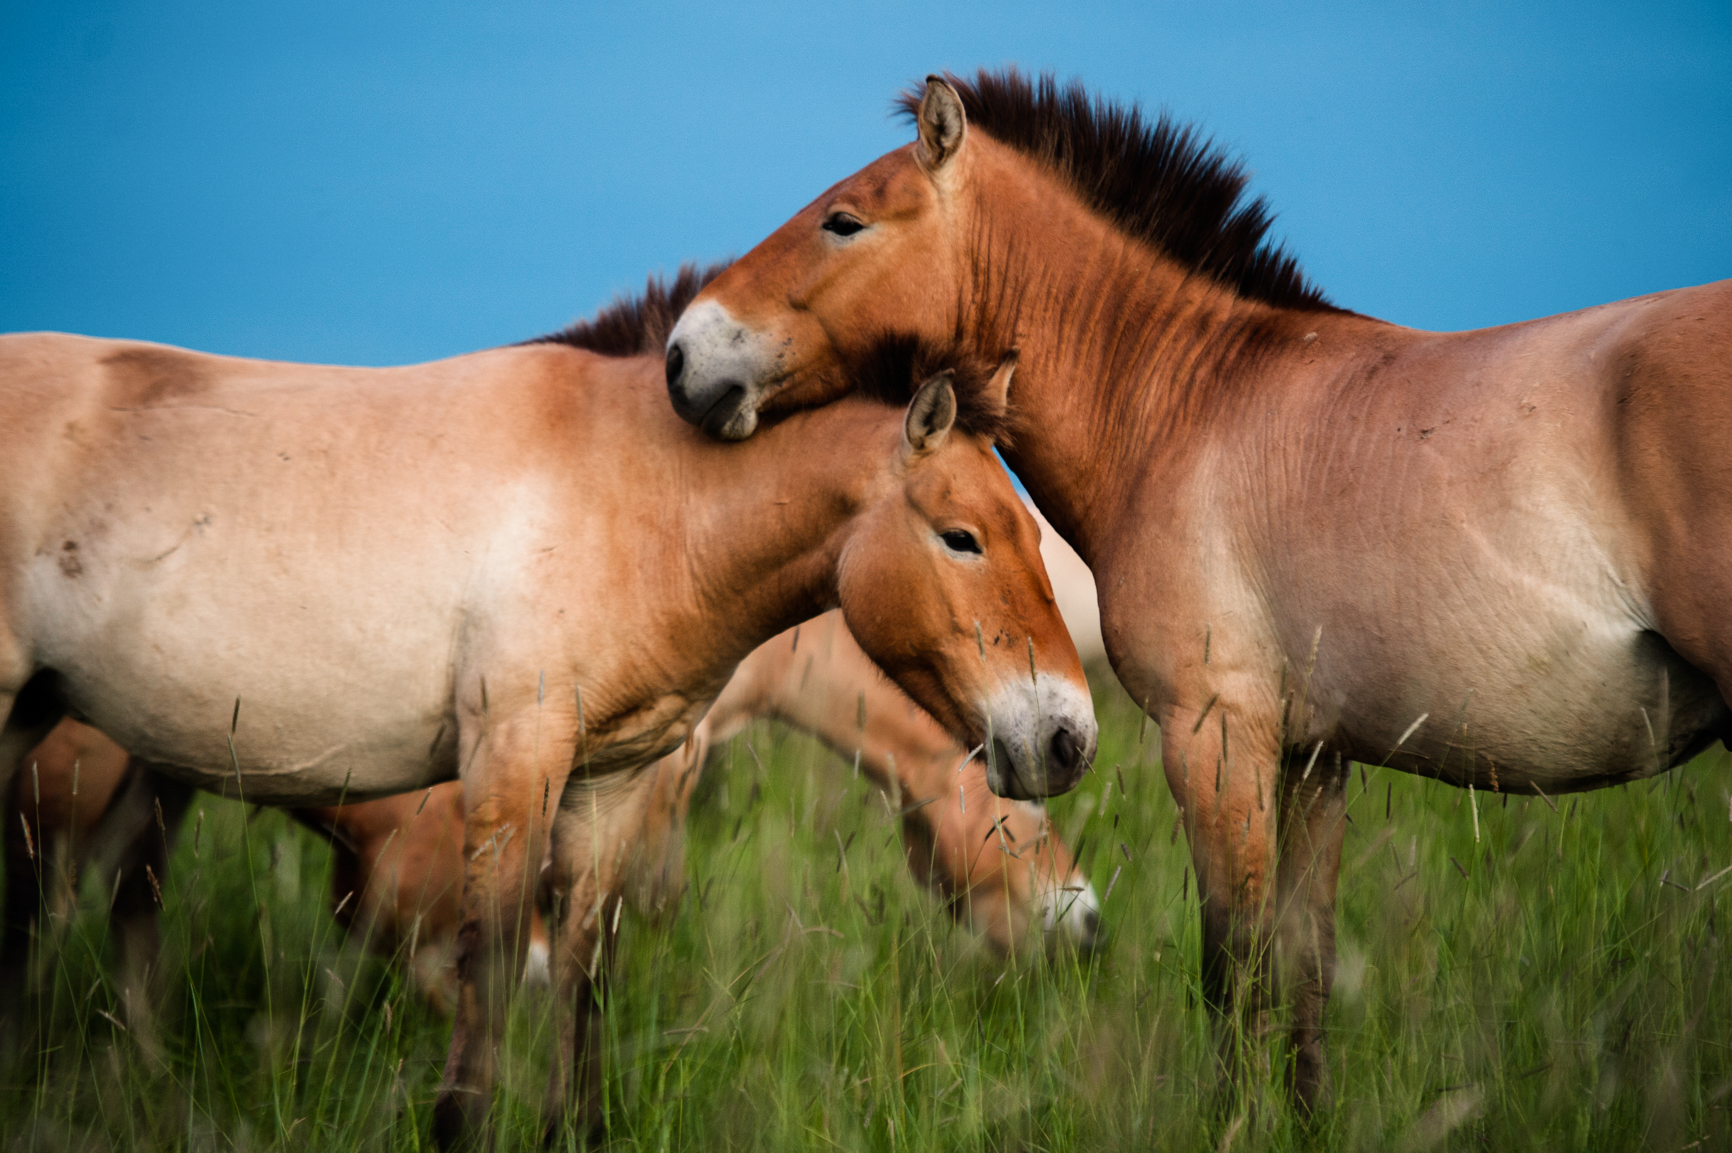 Two wild Przewalski's horses nuzzle each other in a field.